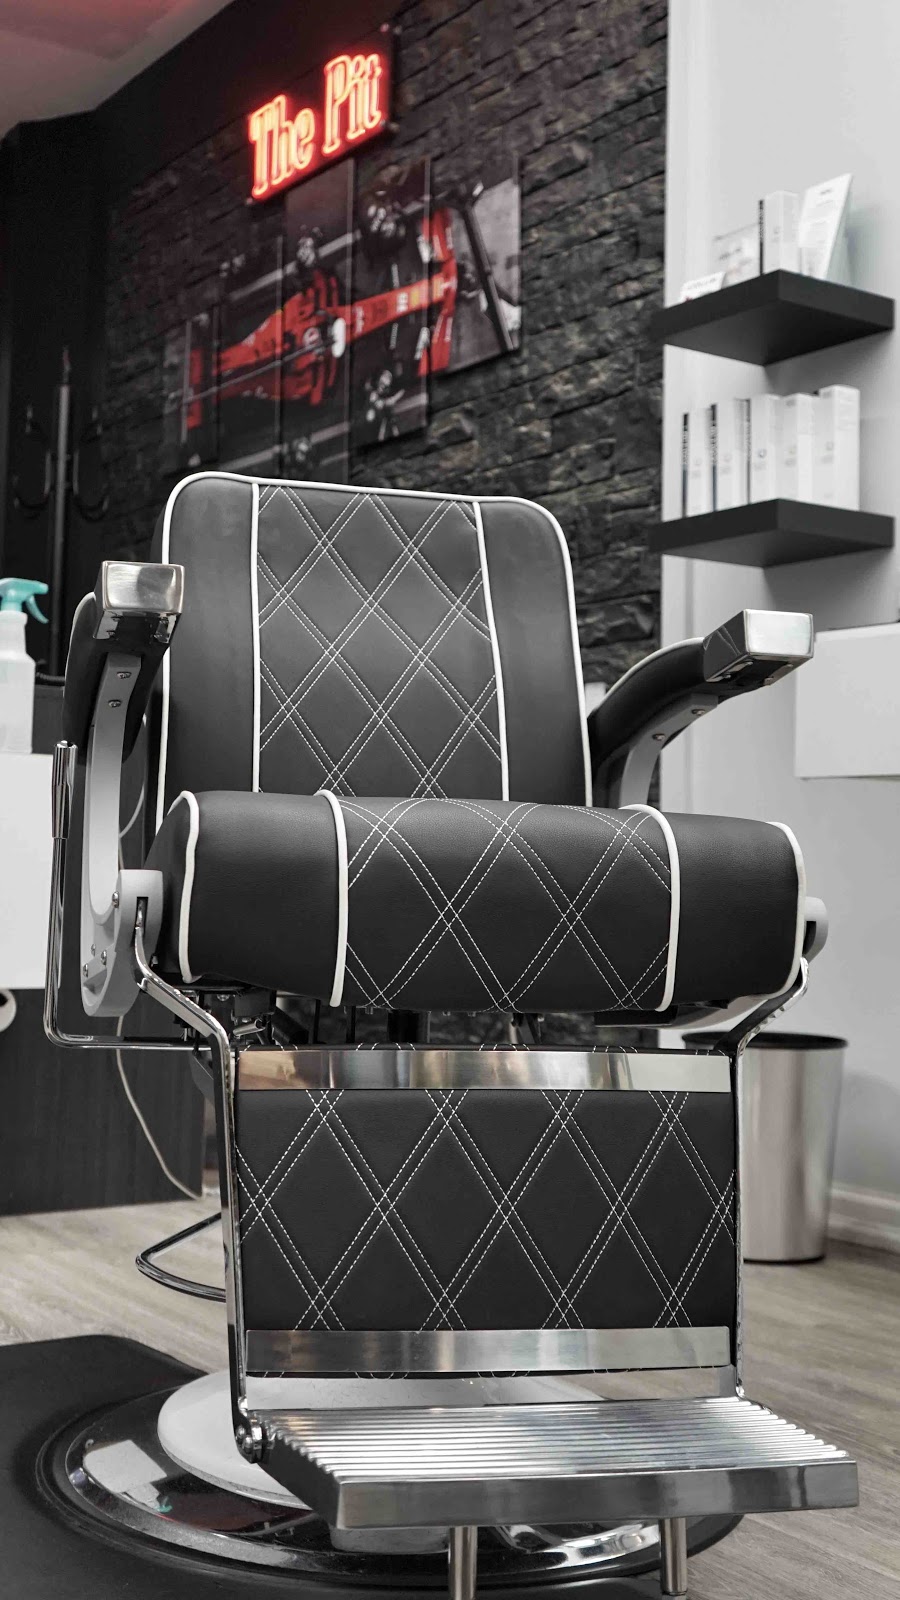 The Pit Barbershop | hair care | 3168 Oak St, Vancouver, BC V6H 2L1, Canada | 6047391008 OR +1 604-739-1008